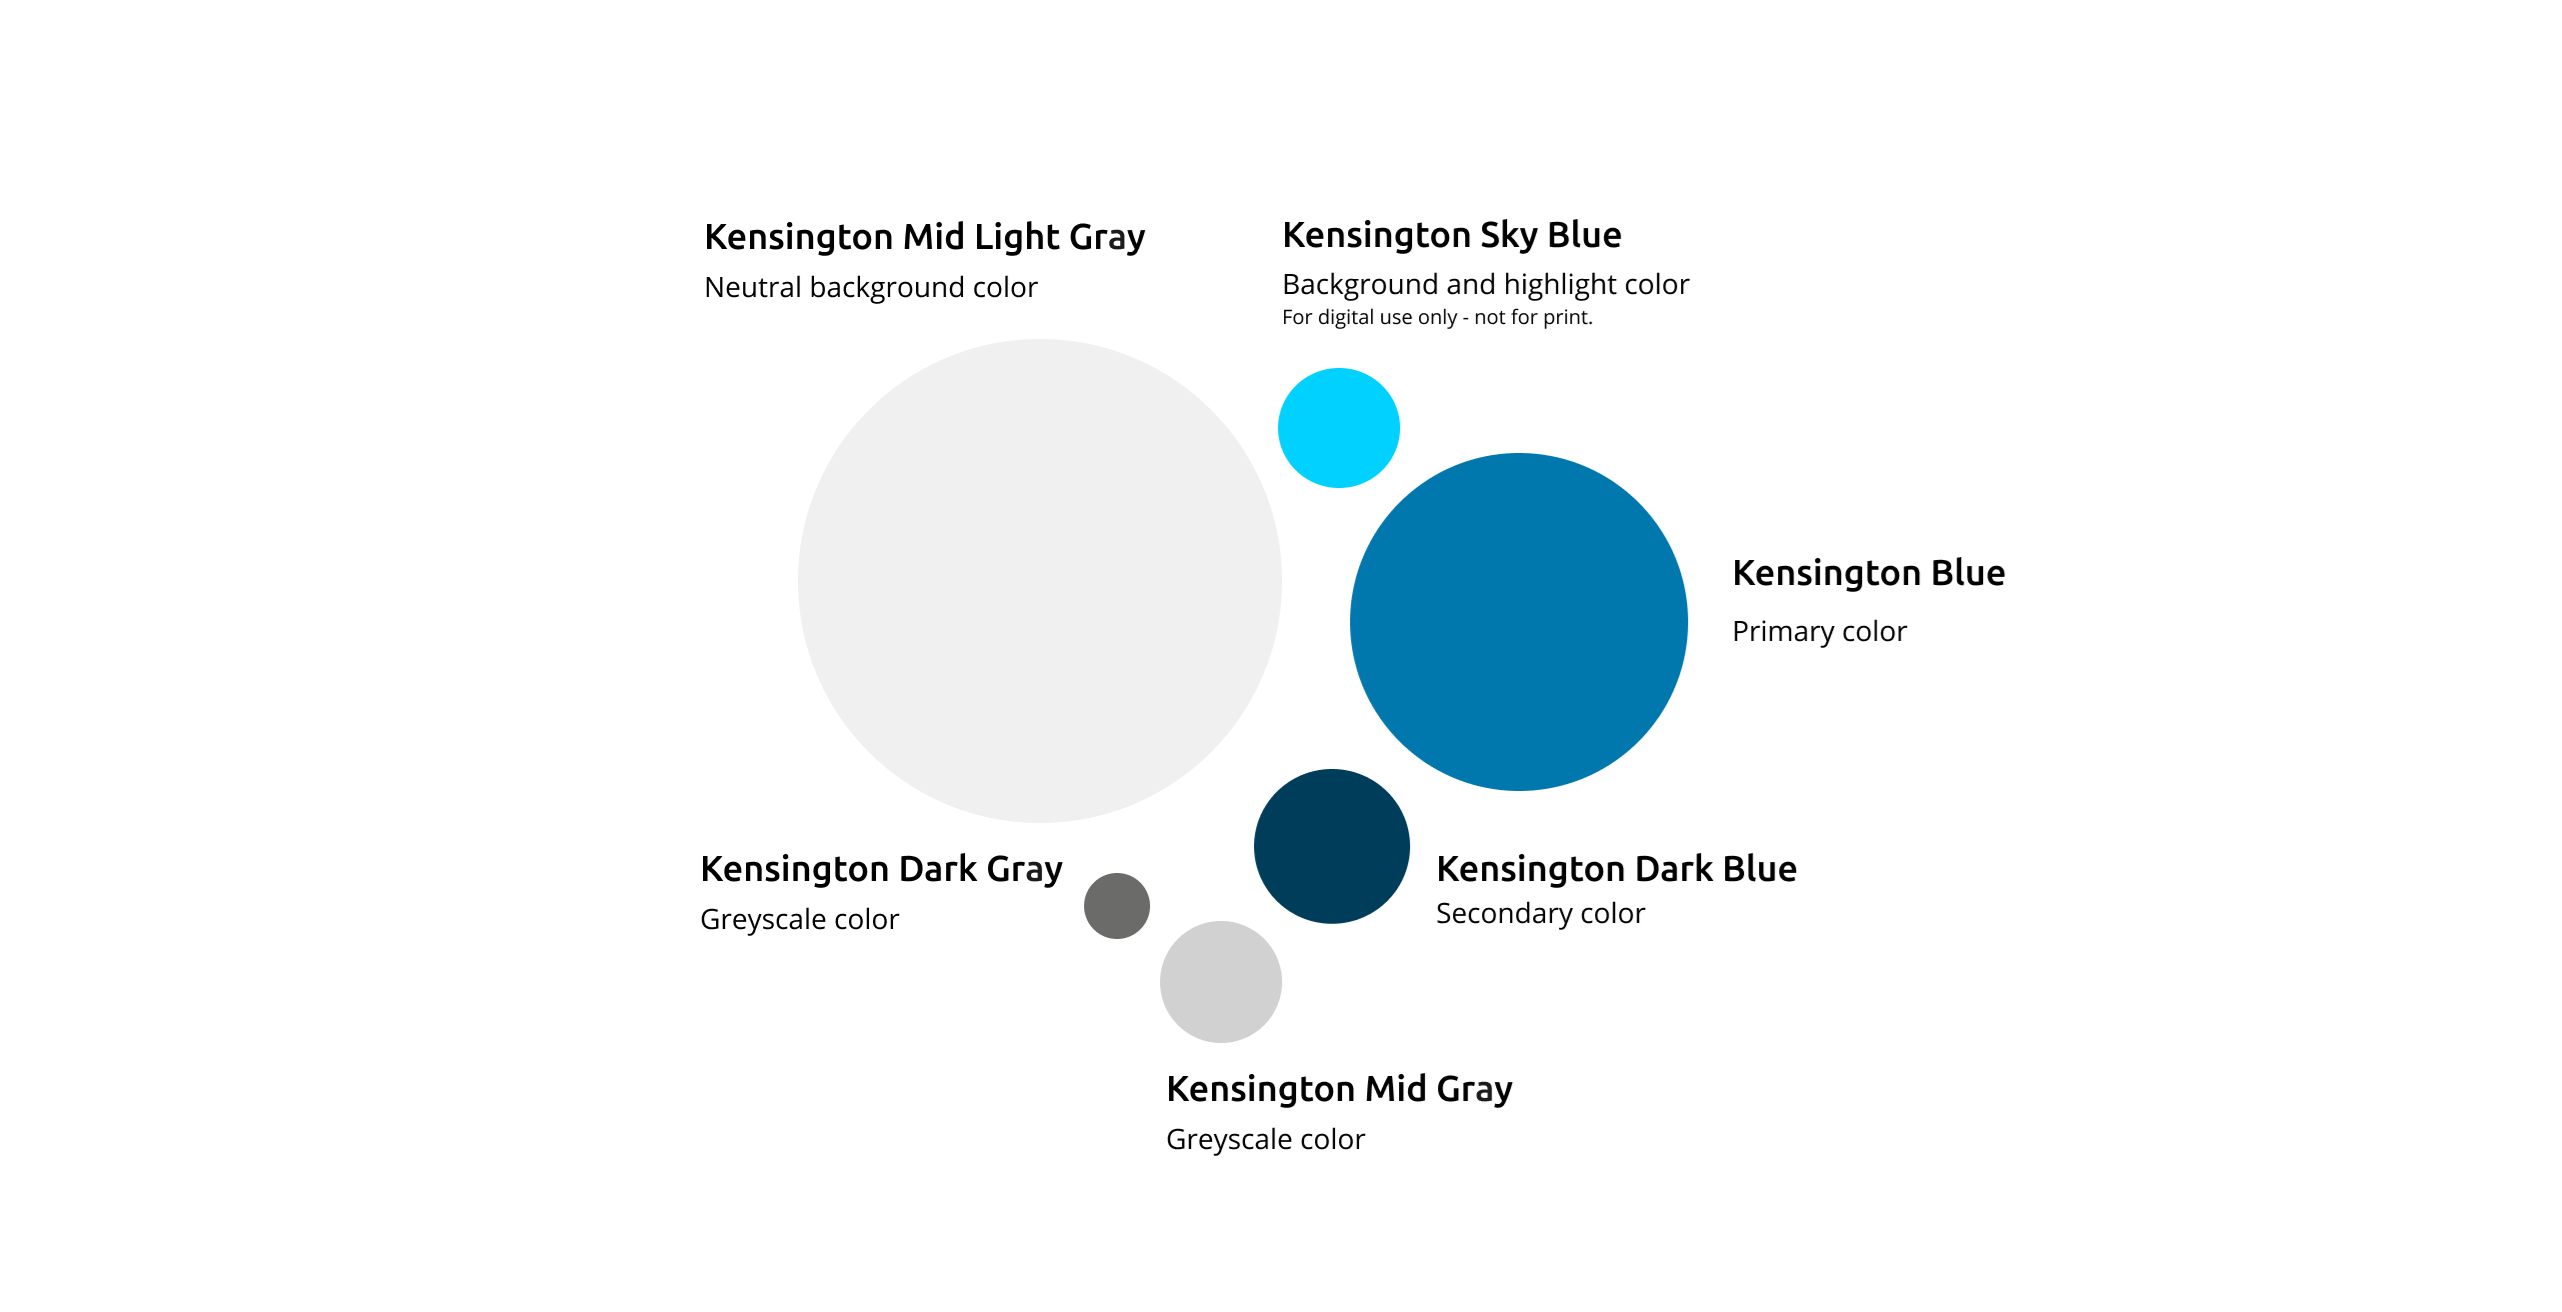 Examples of color usage